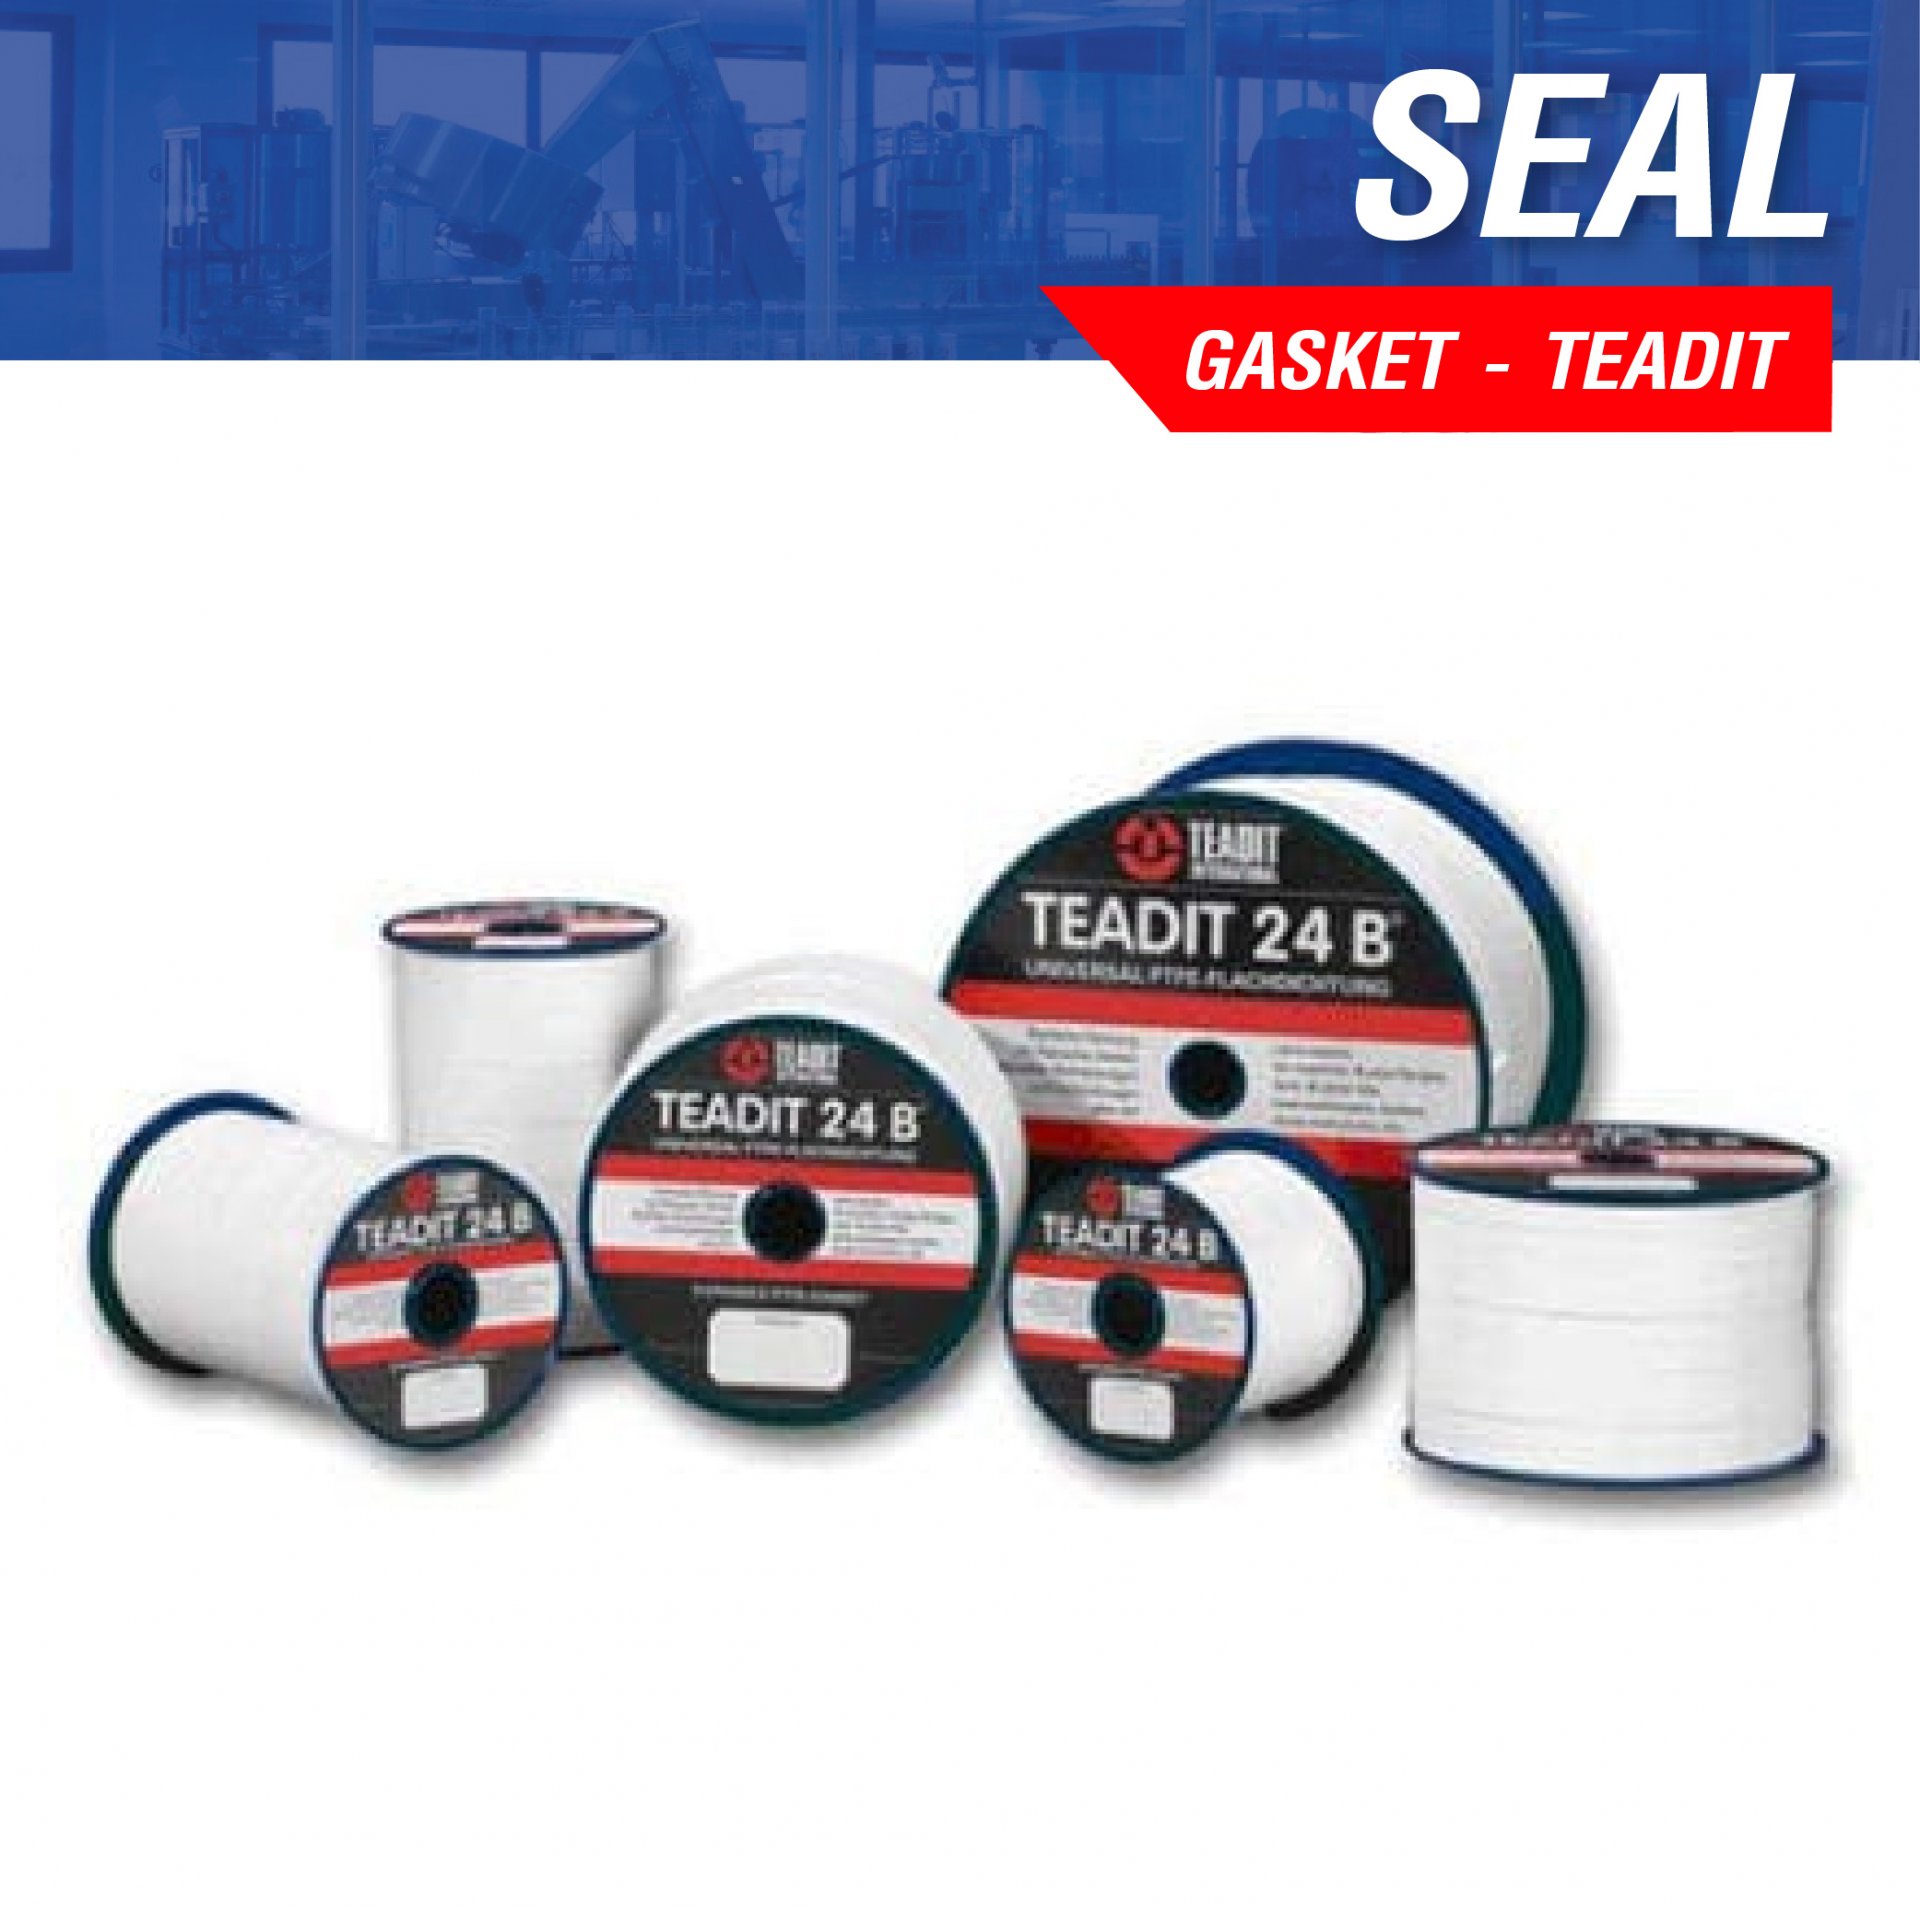 ePTFE  JOINT – SEALANT  TAPES ปะเก็นเส้นเทปเทปล่อน